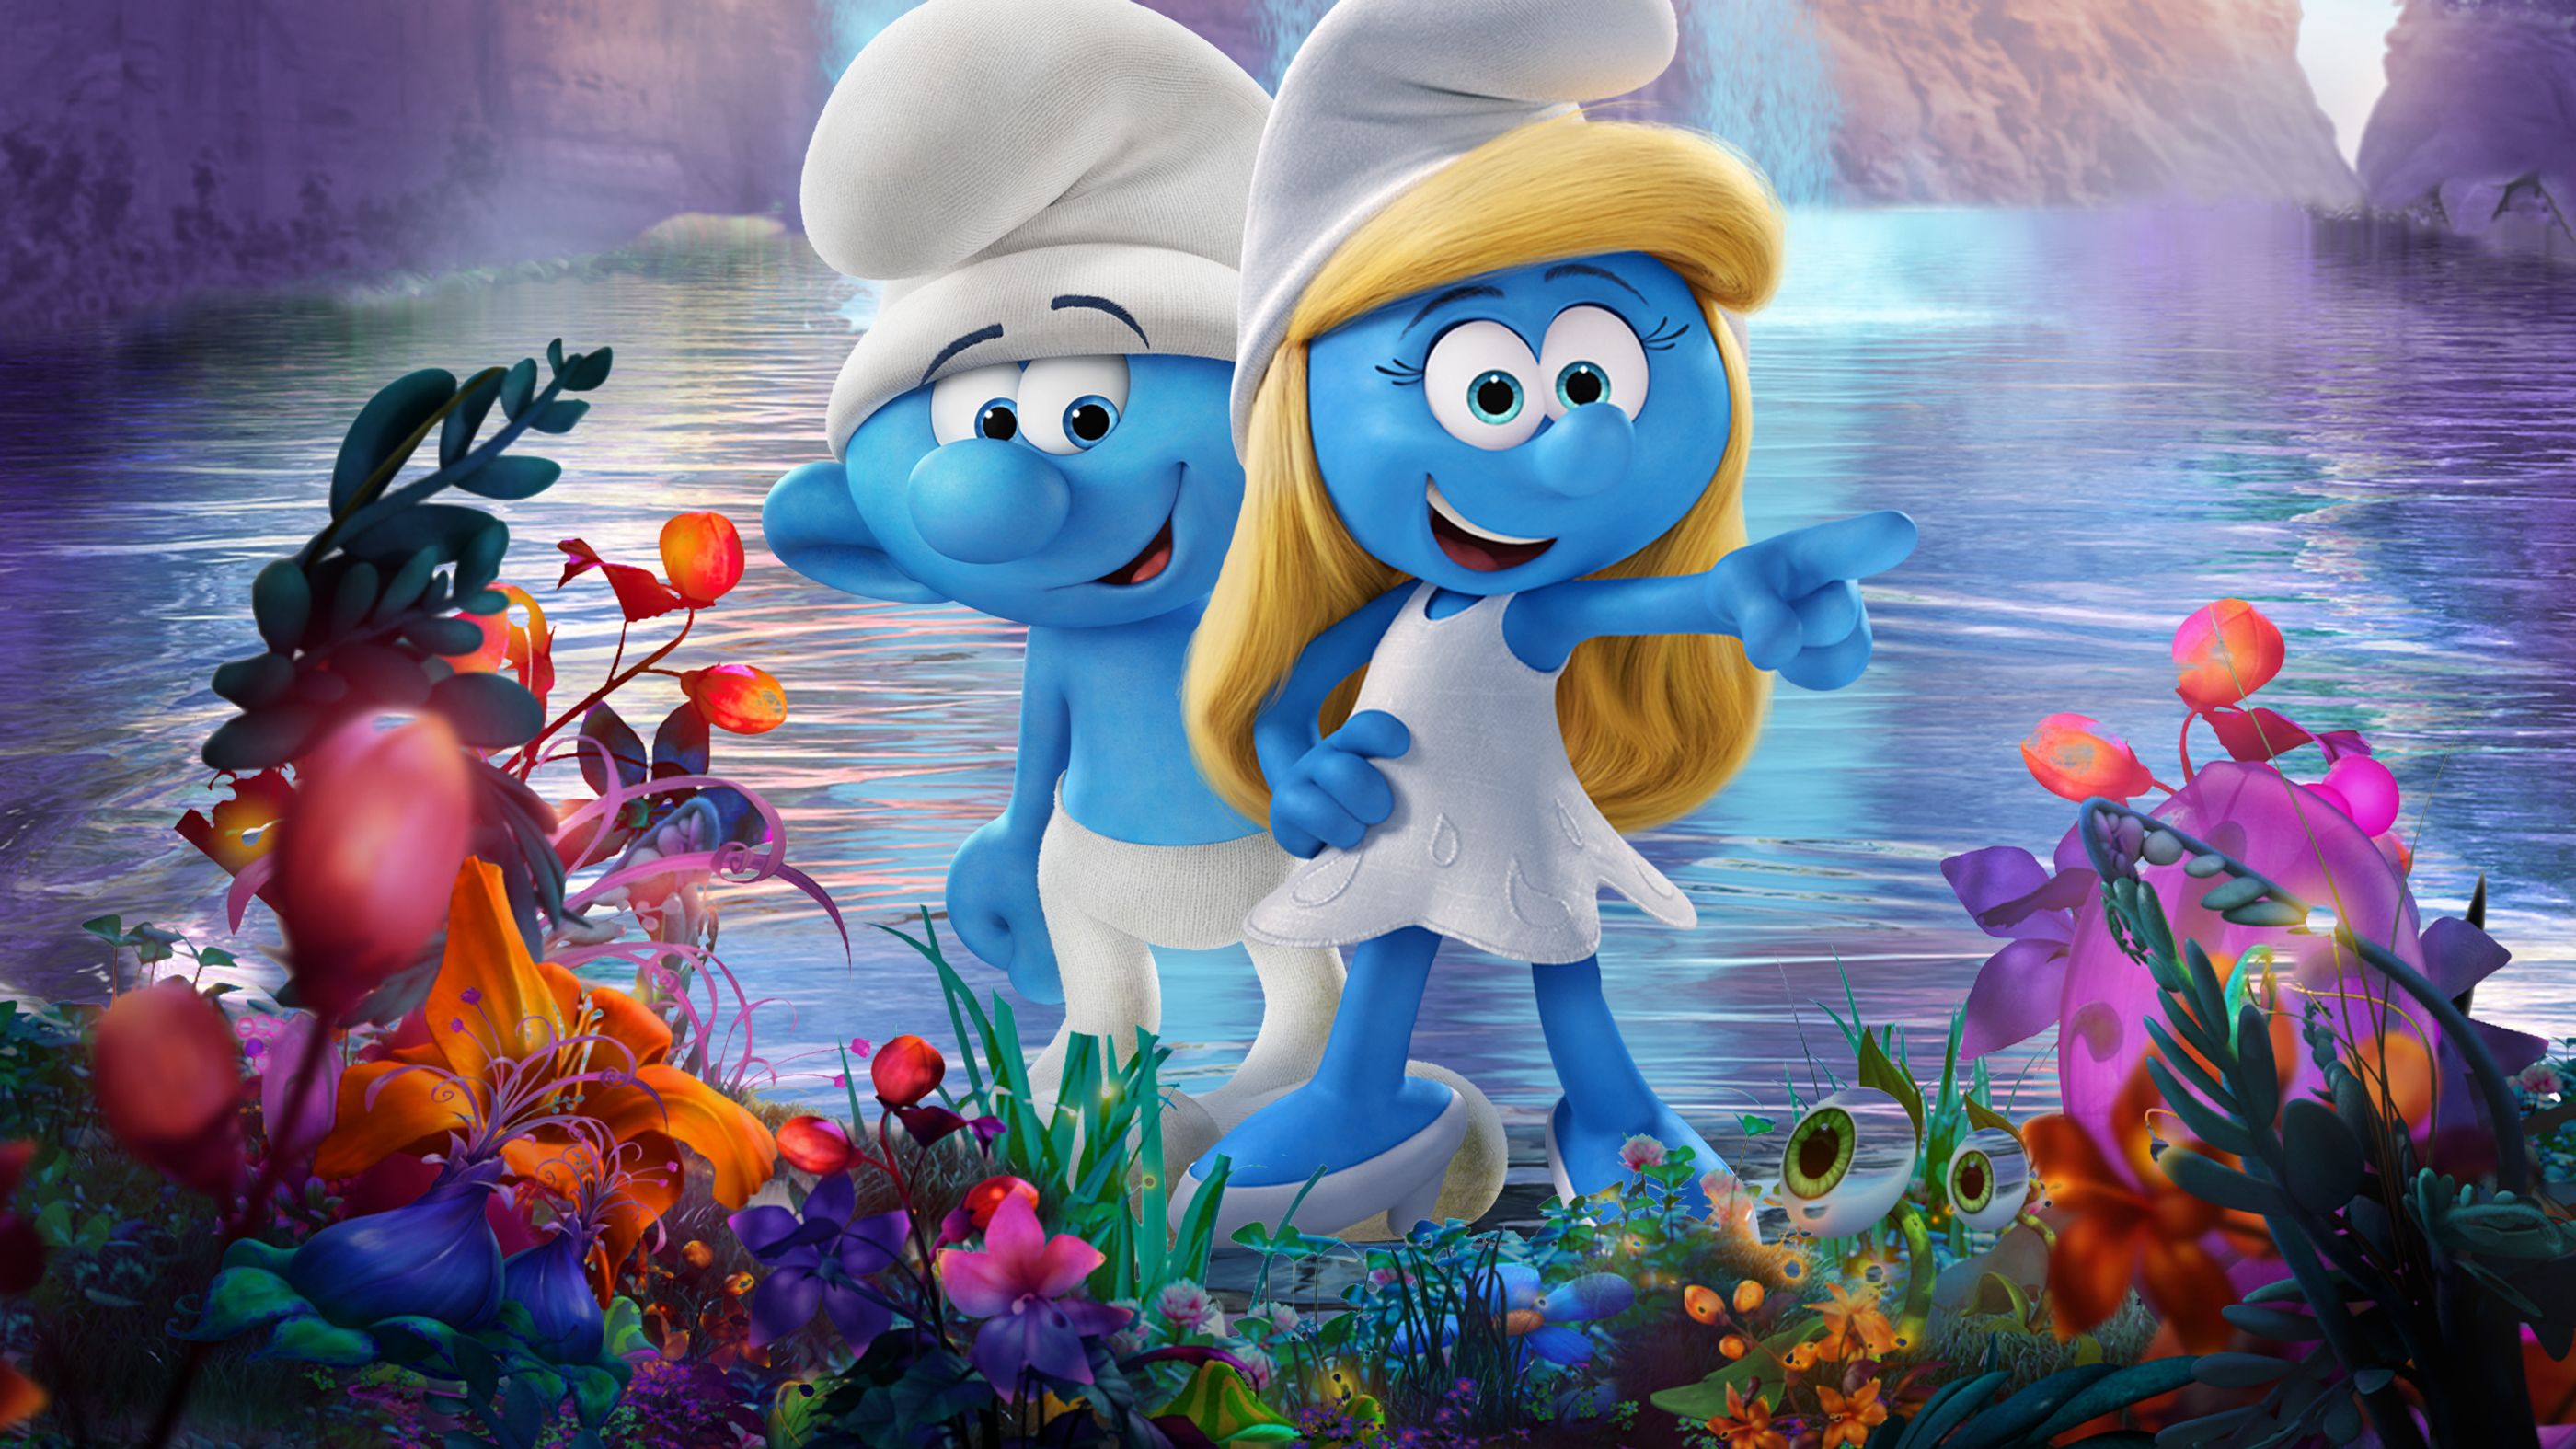 Smurfs: The Lost Village | Movies Anywhere